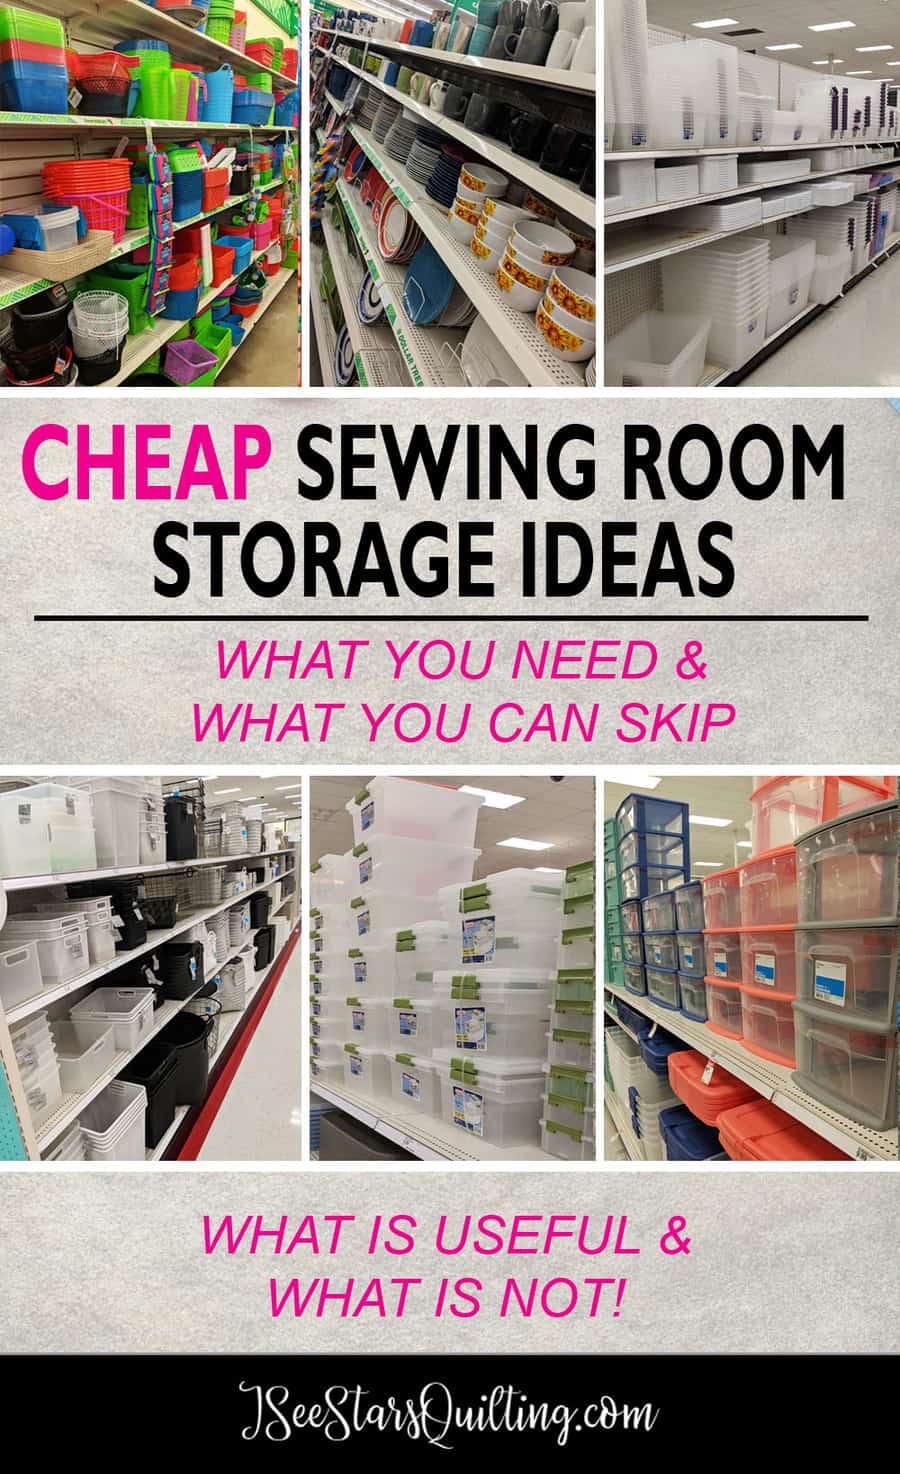 If you're looking for Cheap Sewing Room Storage Ideas, you'll find all my favorite picks here so you know what is worth the money and what isn't worth your time